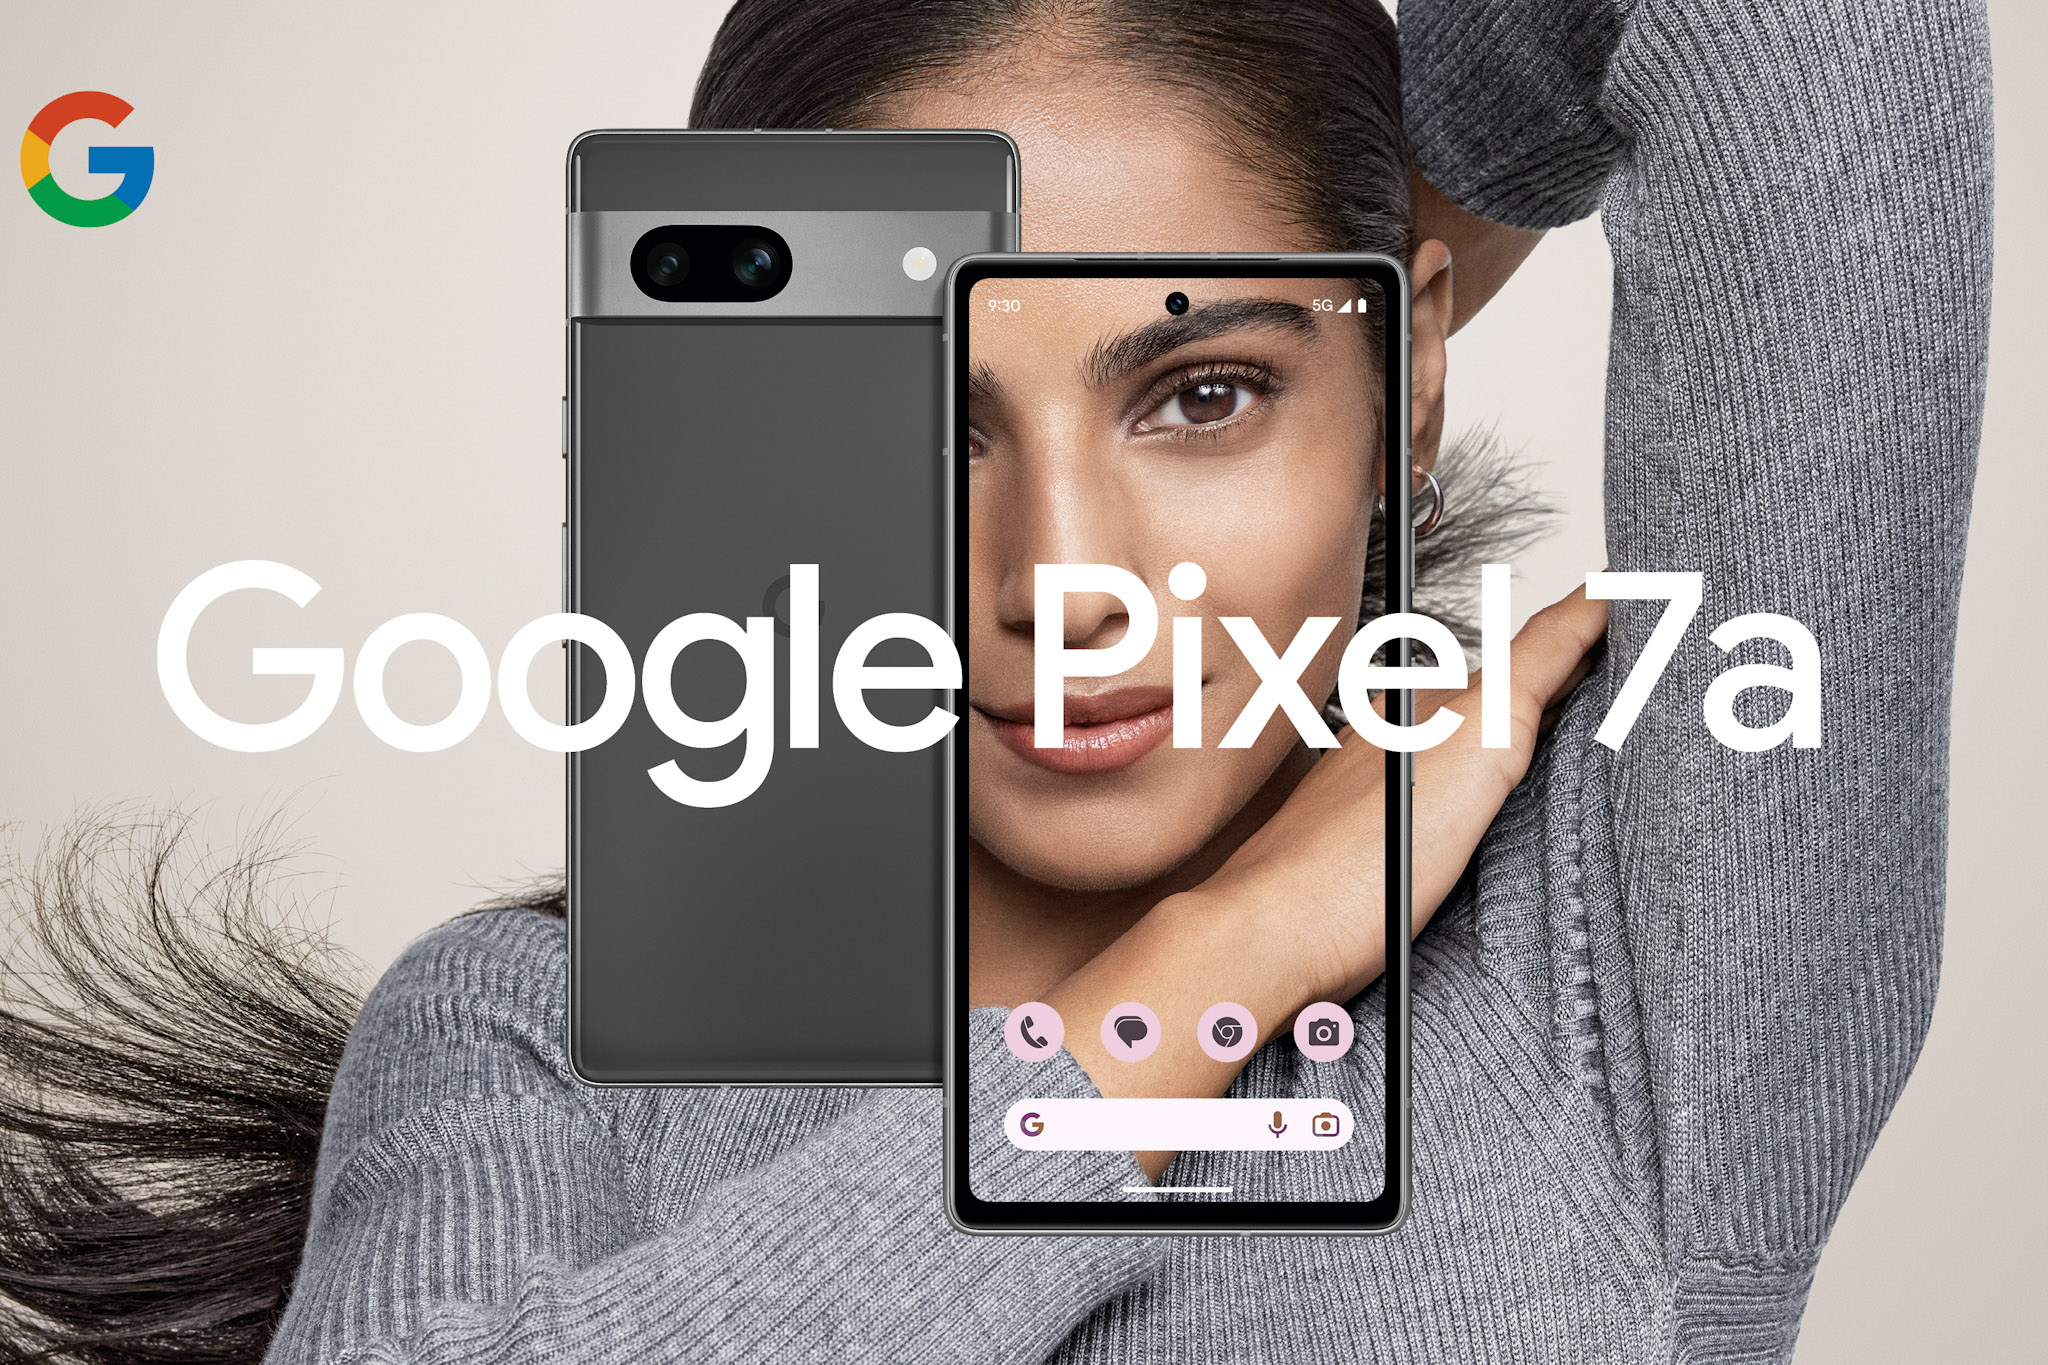 promotional image for the Google Pixel 7a smartphone